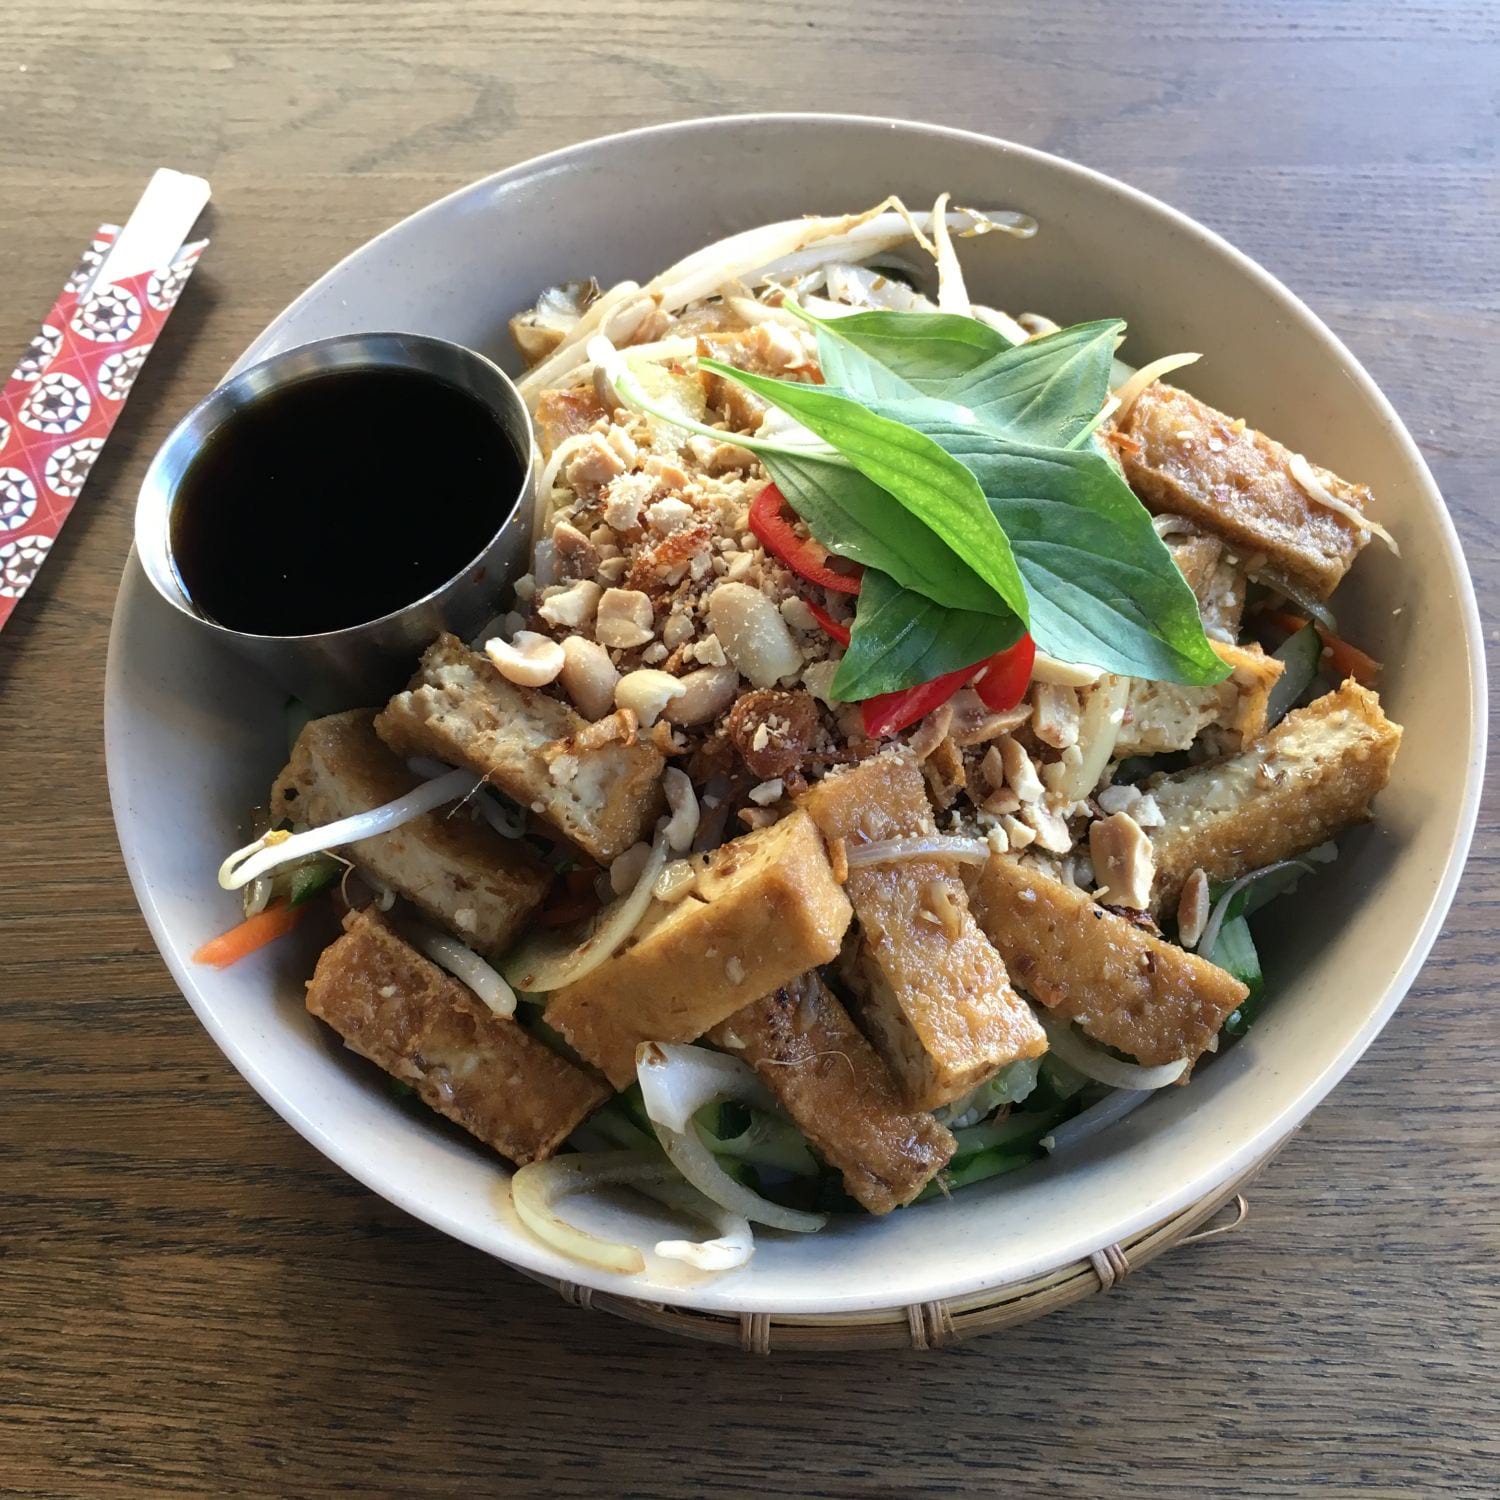 Nudelsallad med tofu – Photo from Eatnam Odengatan by Sophie E. (17/10/2018)